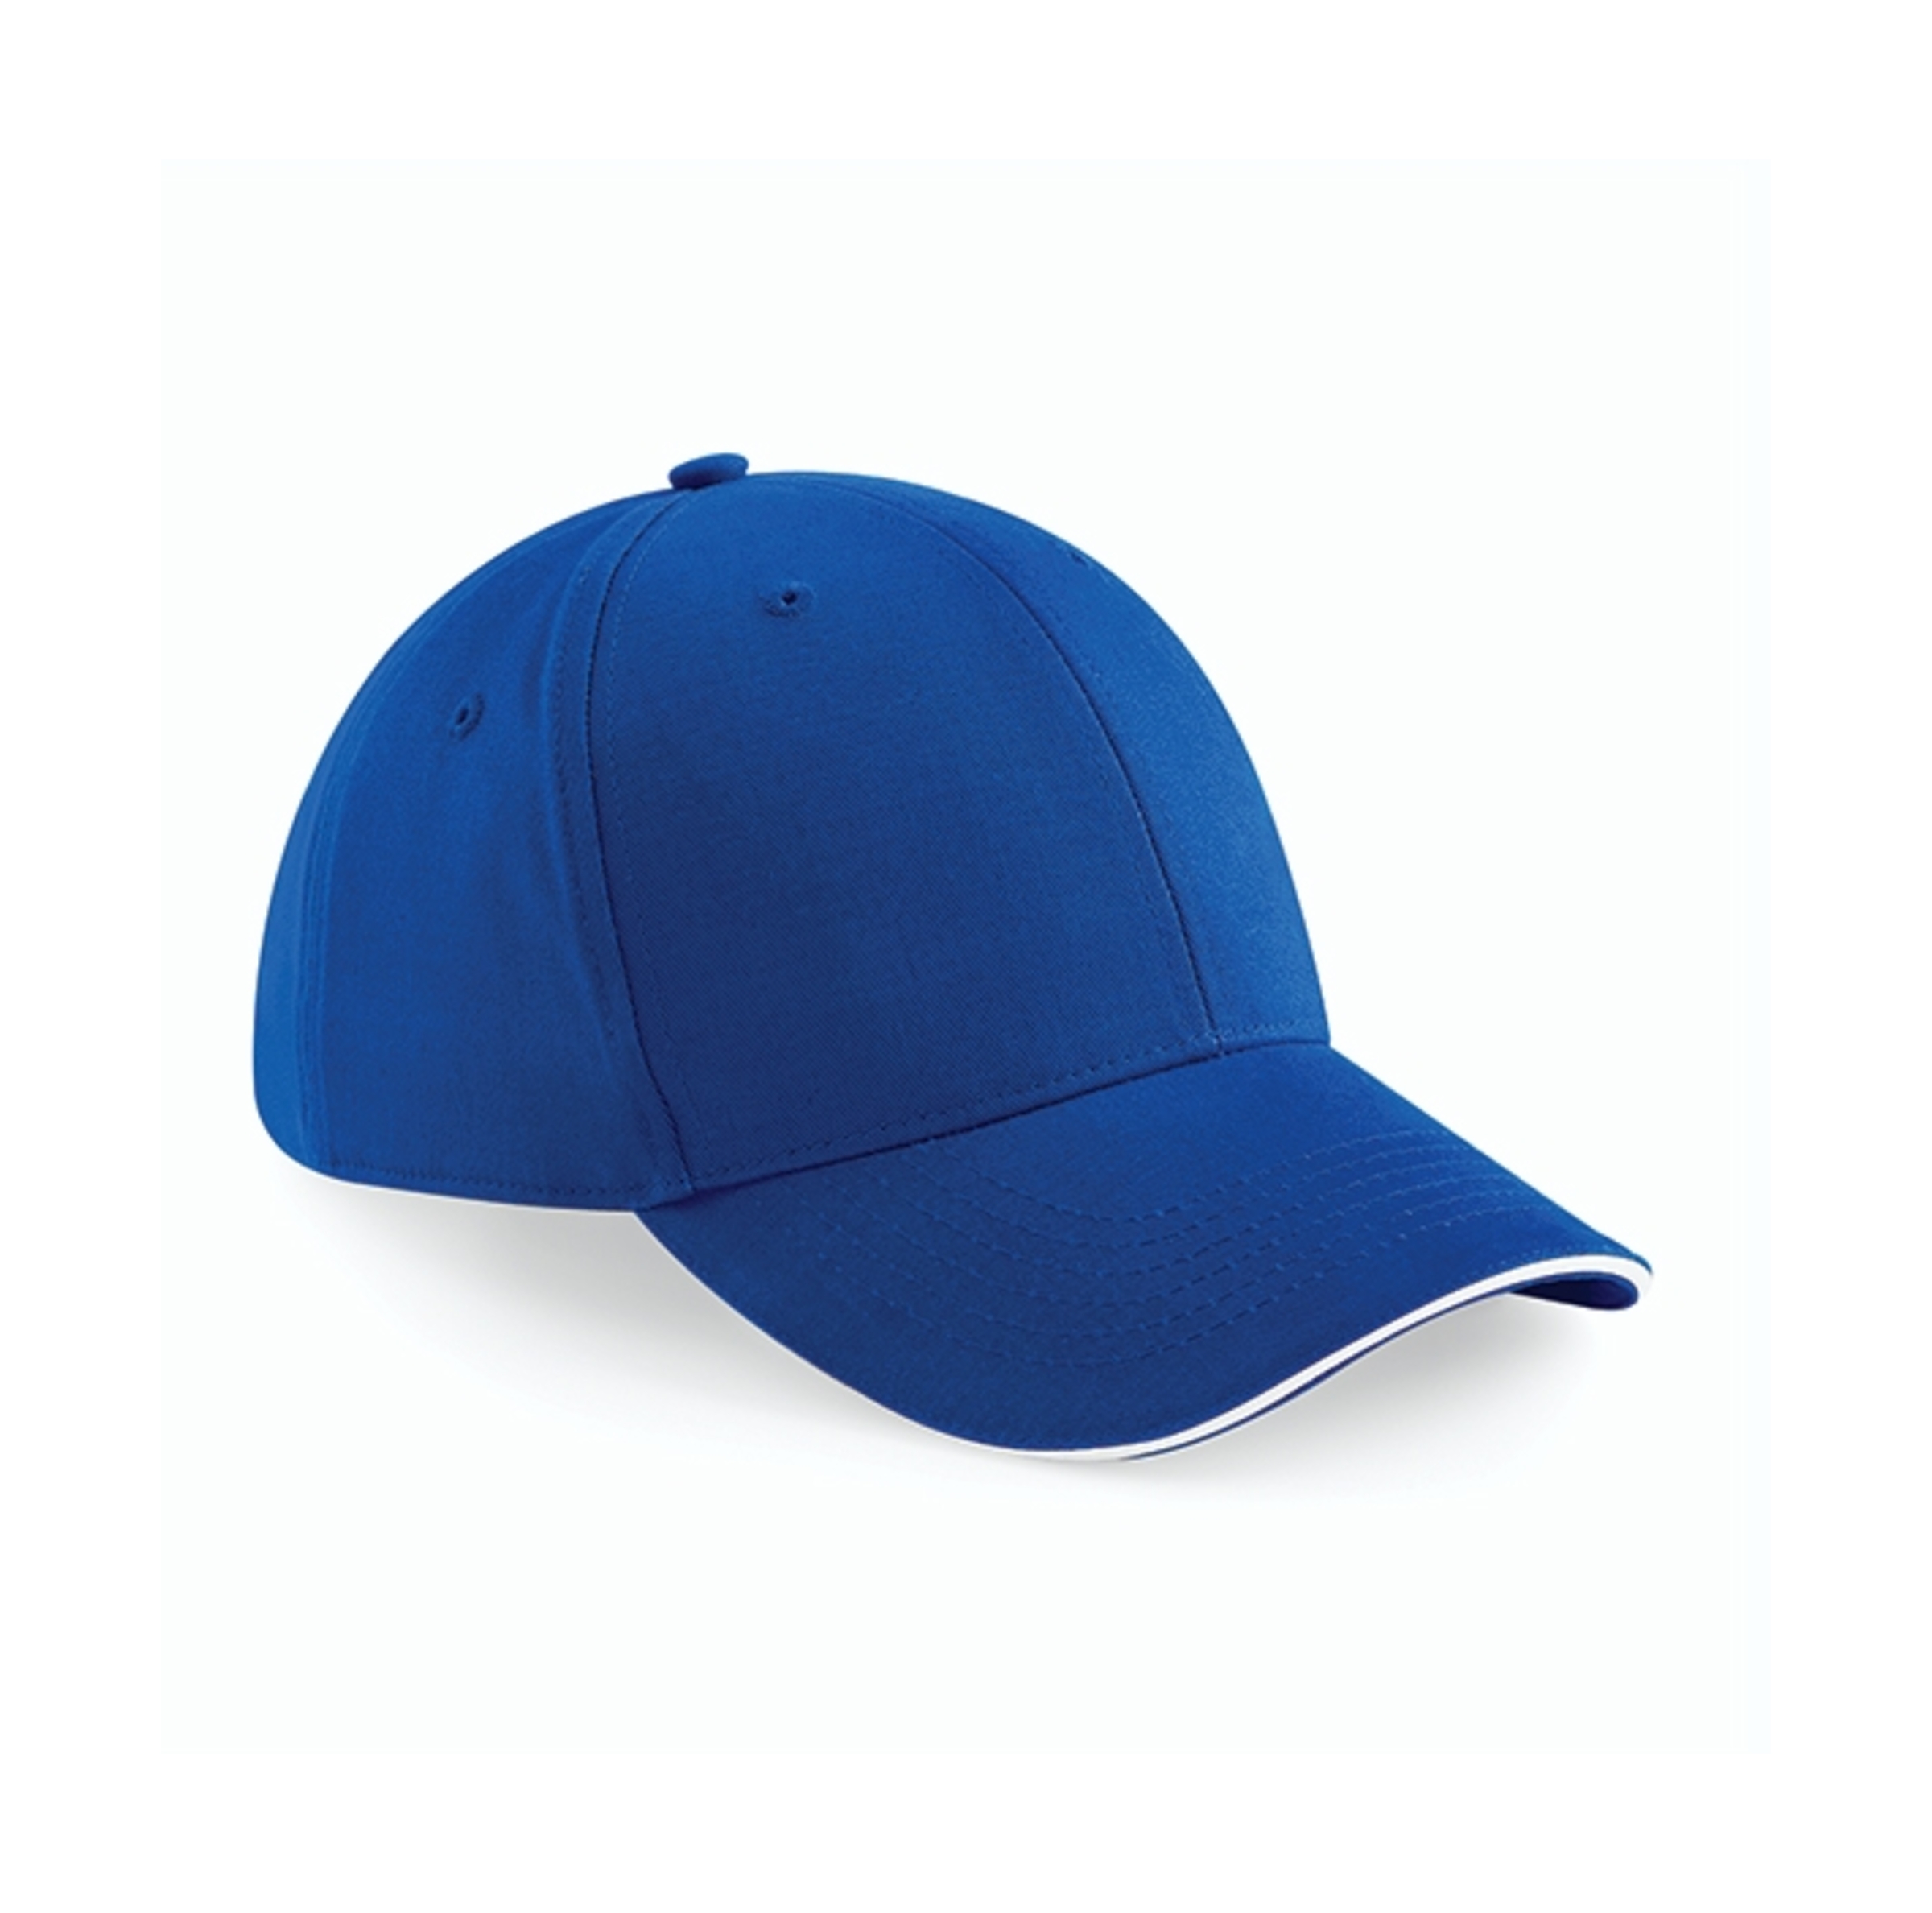 Beechfield Athleisure 6 Panel Cap - Bright Royal/White - One Size